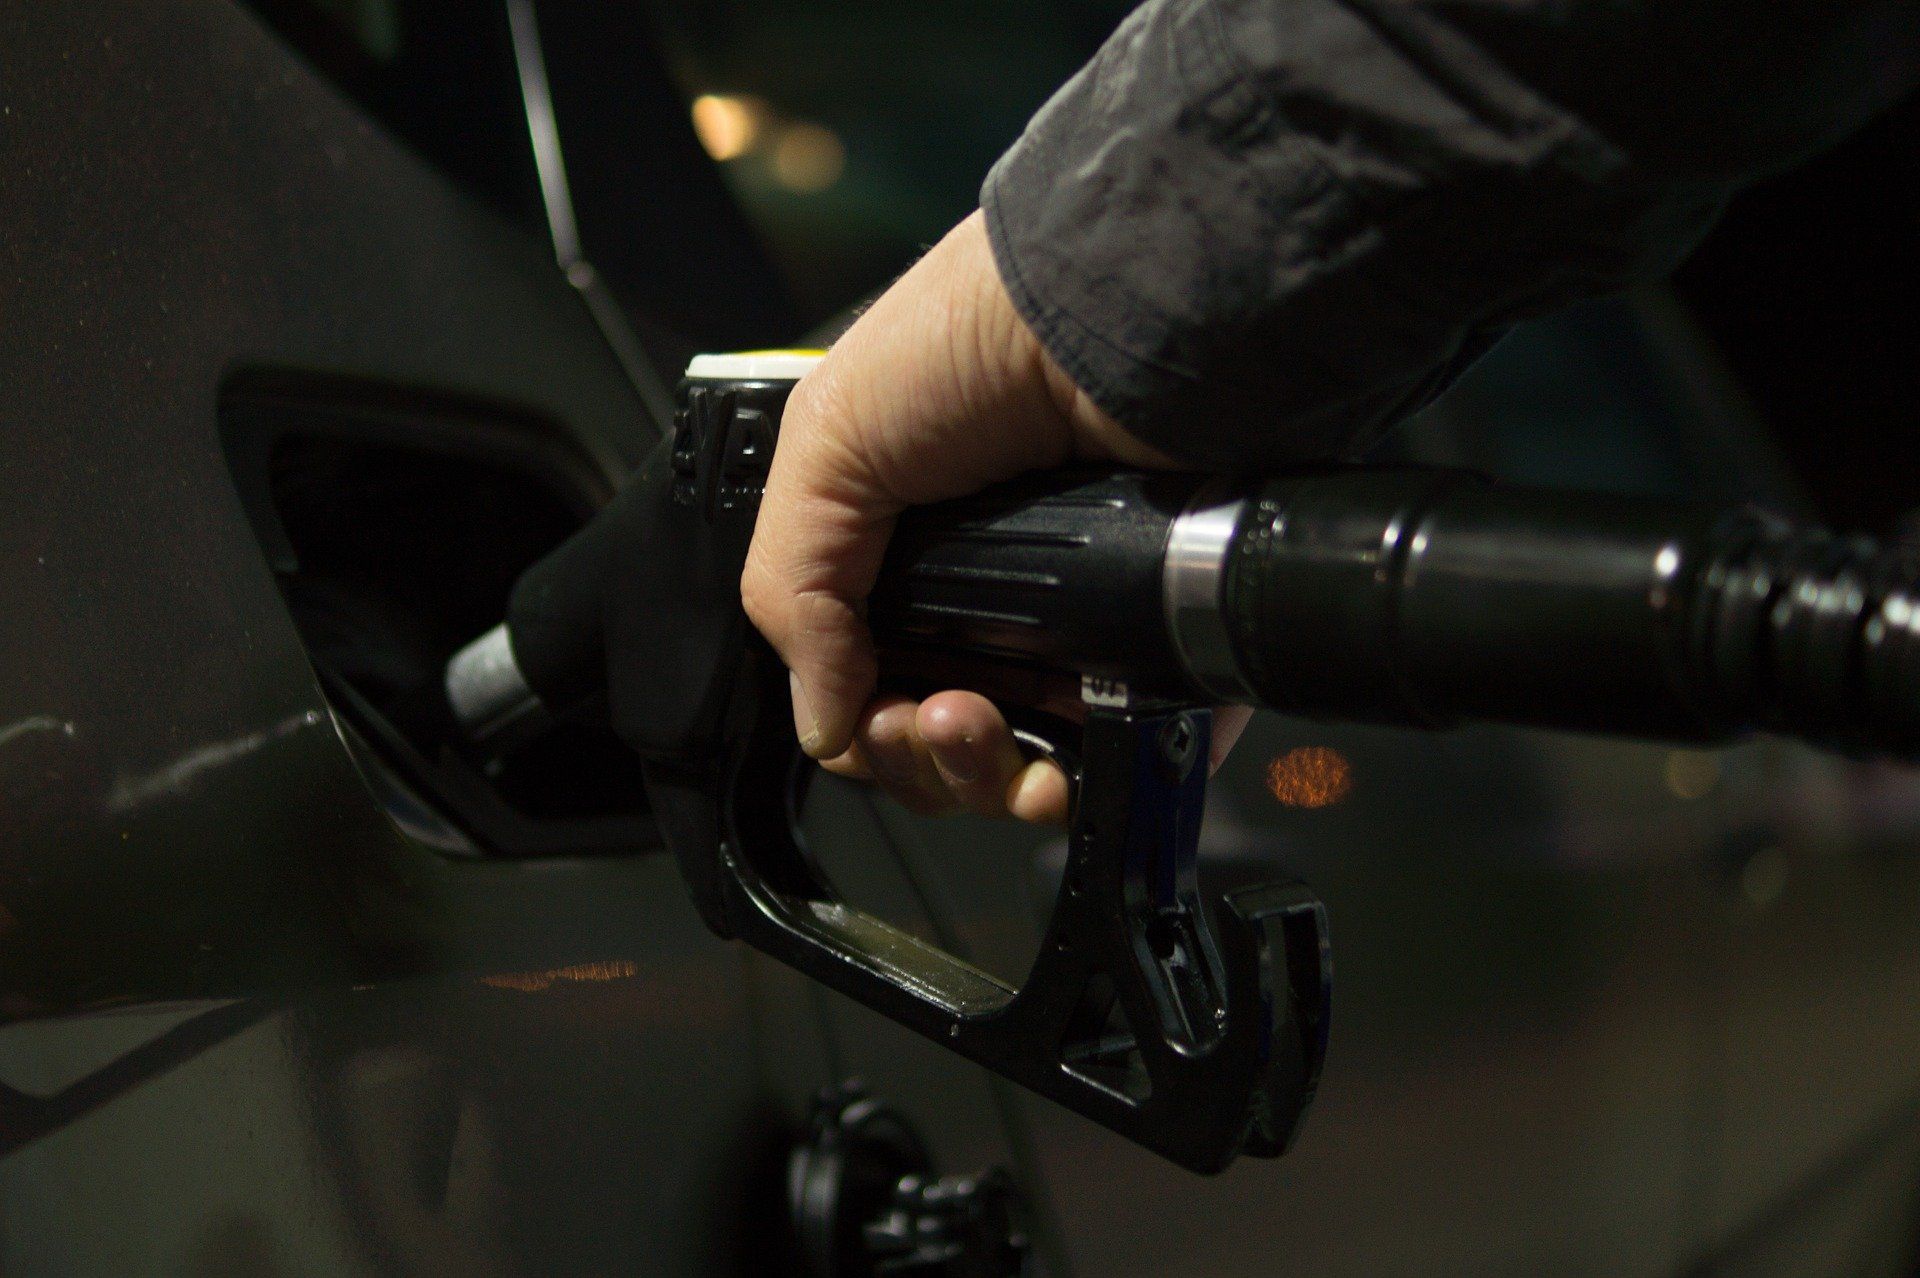 Fuel Price today: Petrol priced at Rs 95.41, diesel Rs 86.67 in Delhi on December 7